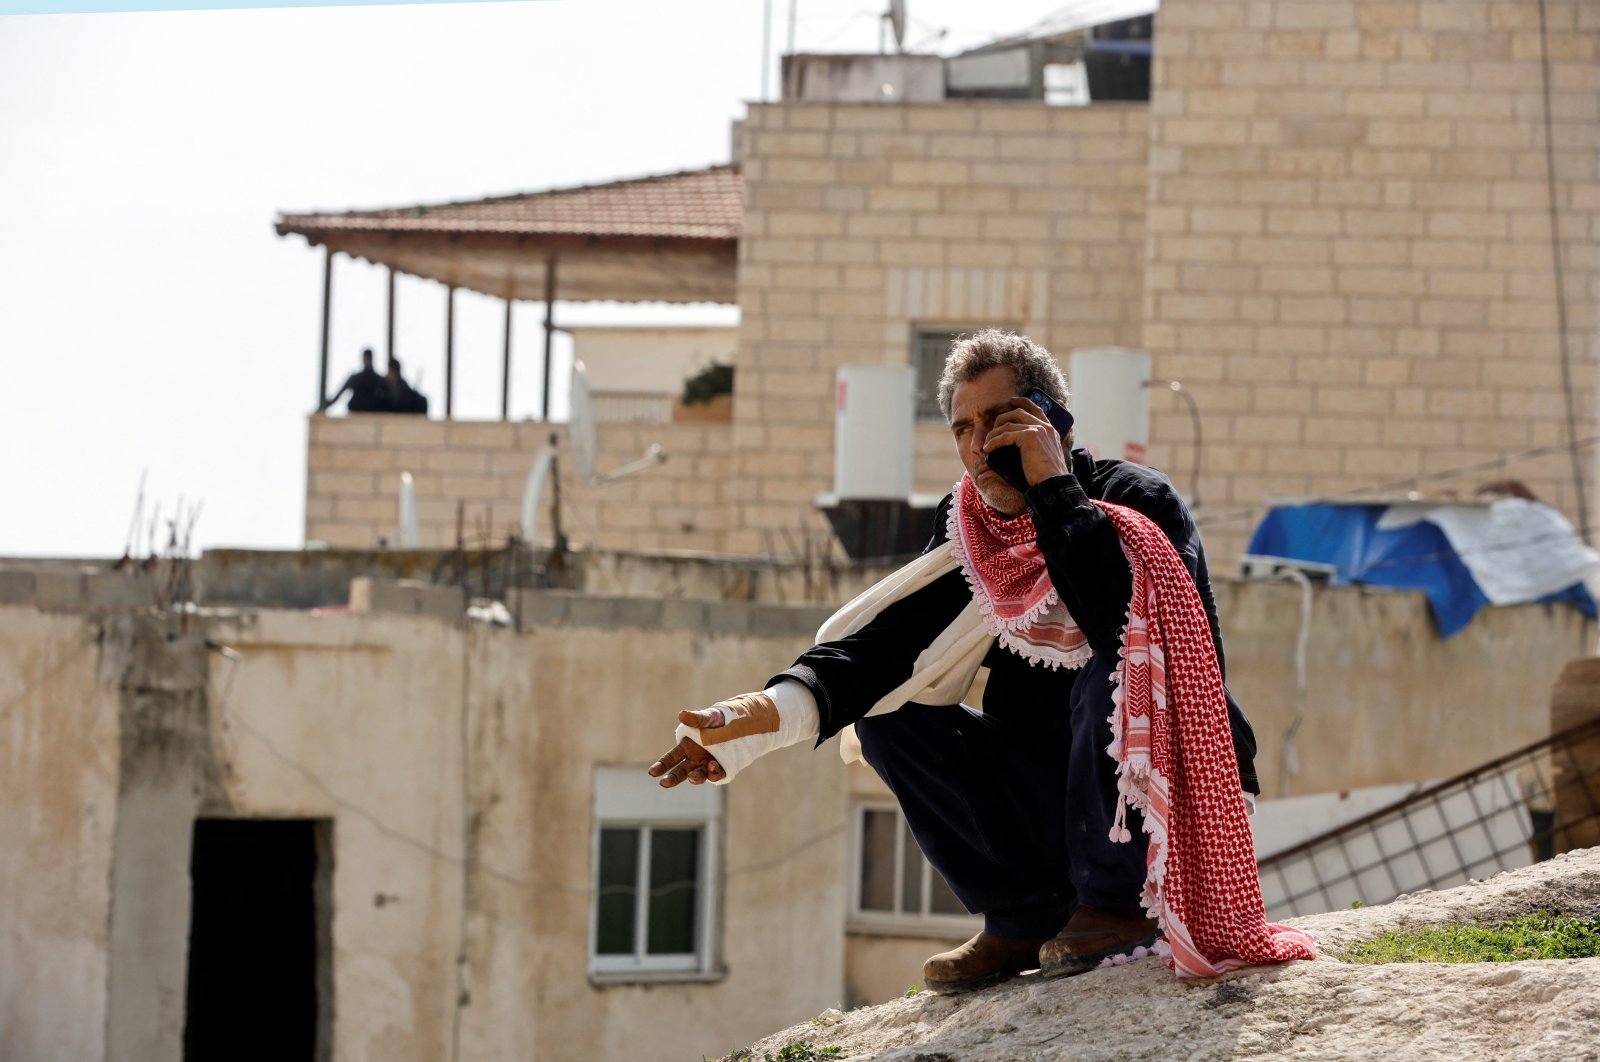 Moussa, the father of Palestinian Khayri Alqam who killed people in a synagogue attack on the outskirts of Jerusalem, speaks on the phone outside the family home as it is sealed off, in A-Tur, East Jerusalem, Jan. 29, 2023. (Reuters Photo)